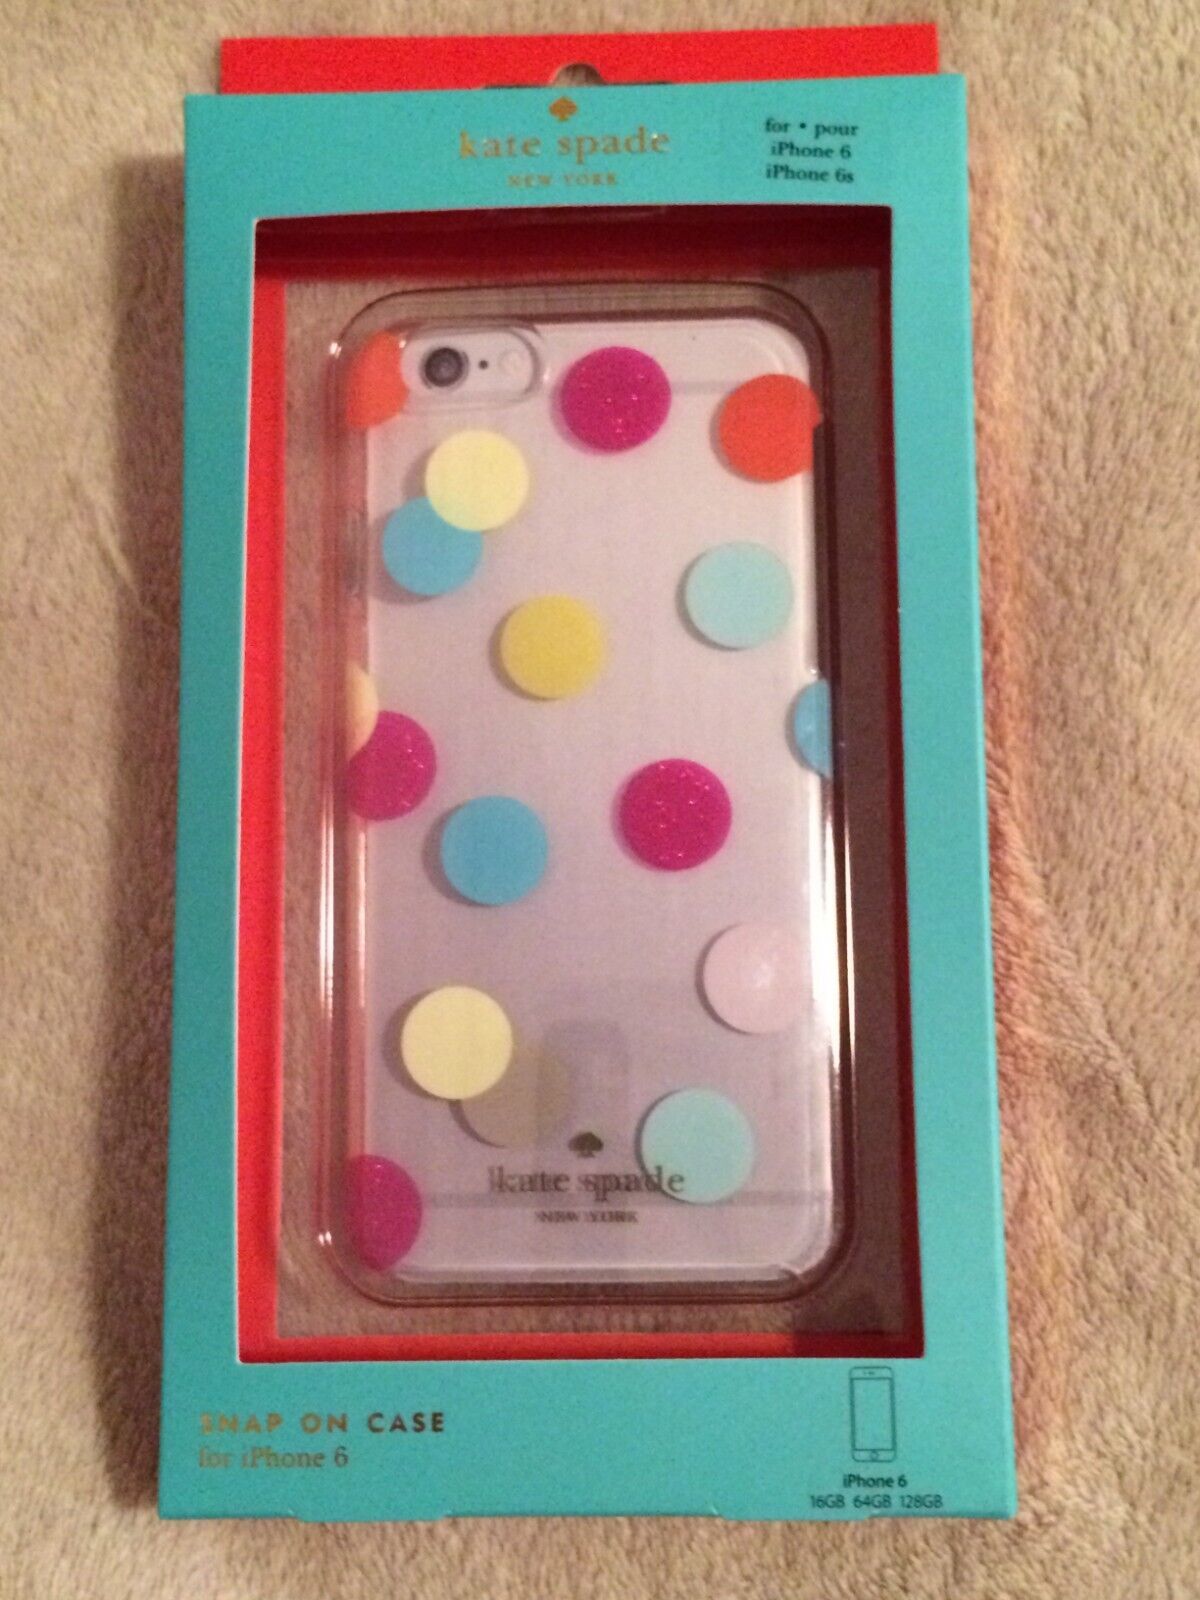 Primary image for Kate Spade iPhone Case!!! NEW IN PACKAGE